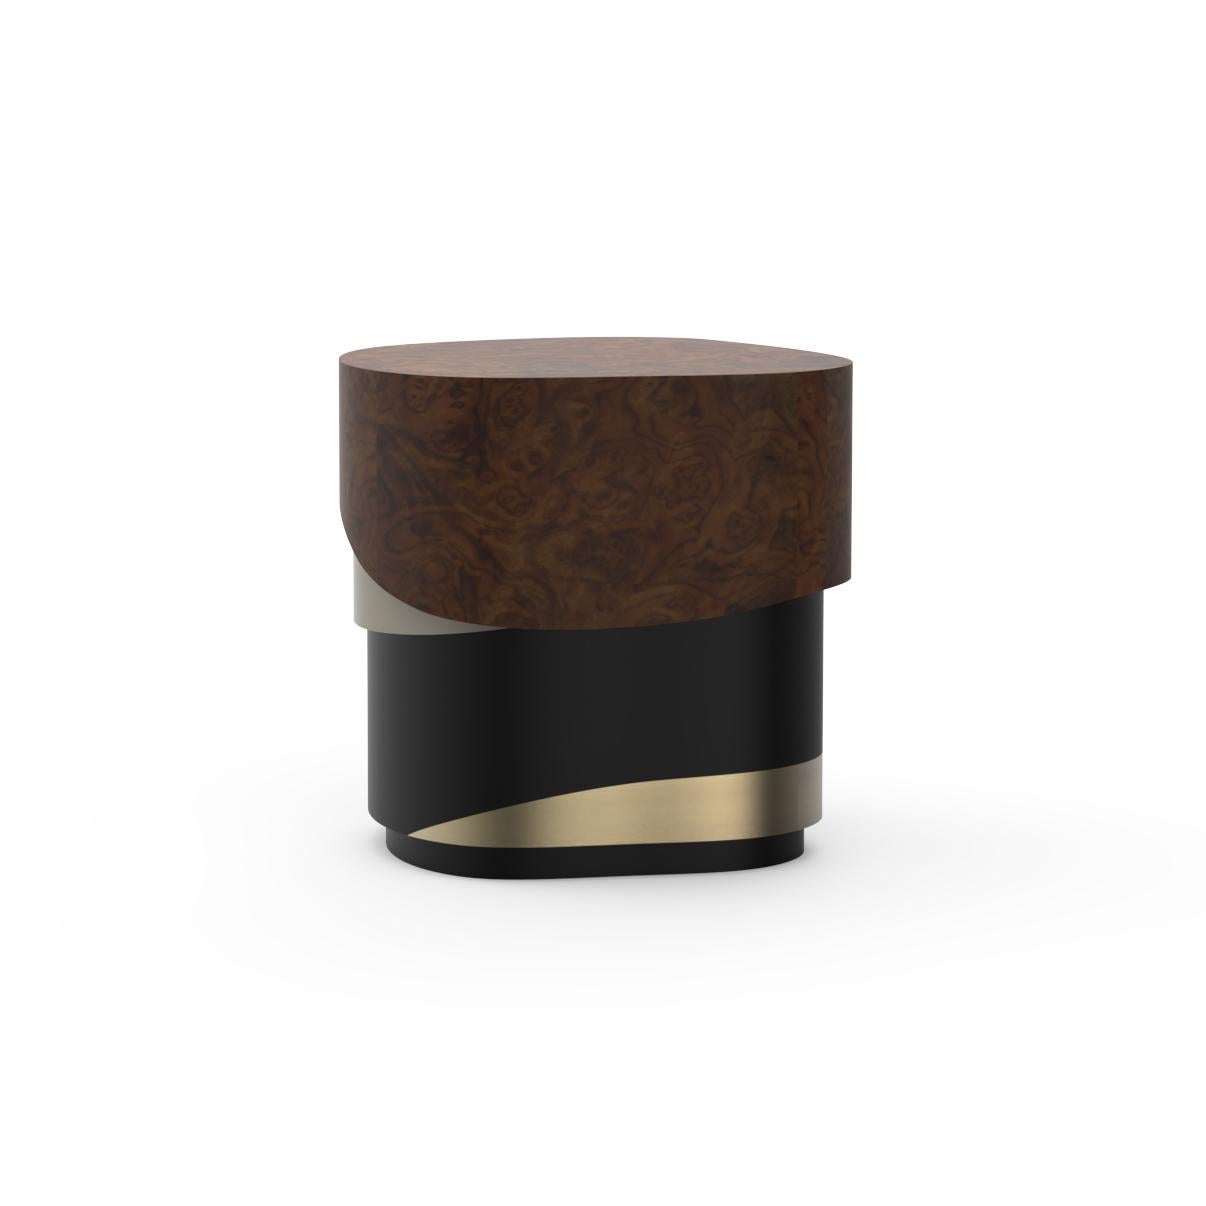 Sistelo Side Table, Contemporary Collection, Handcrafted in Portugal - Europe by Greenapple.

The Sistelo side table draws inspiration from the captivating landscape of Sistelo, emerging as a tribute to the hidden gem on the outskirts of the